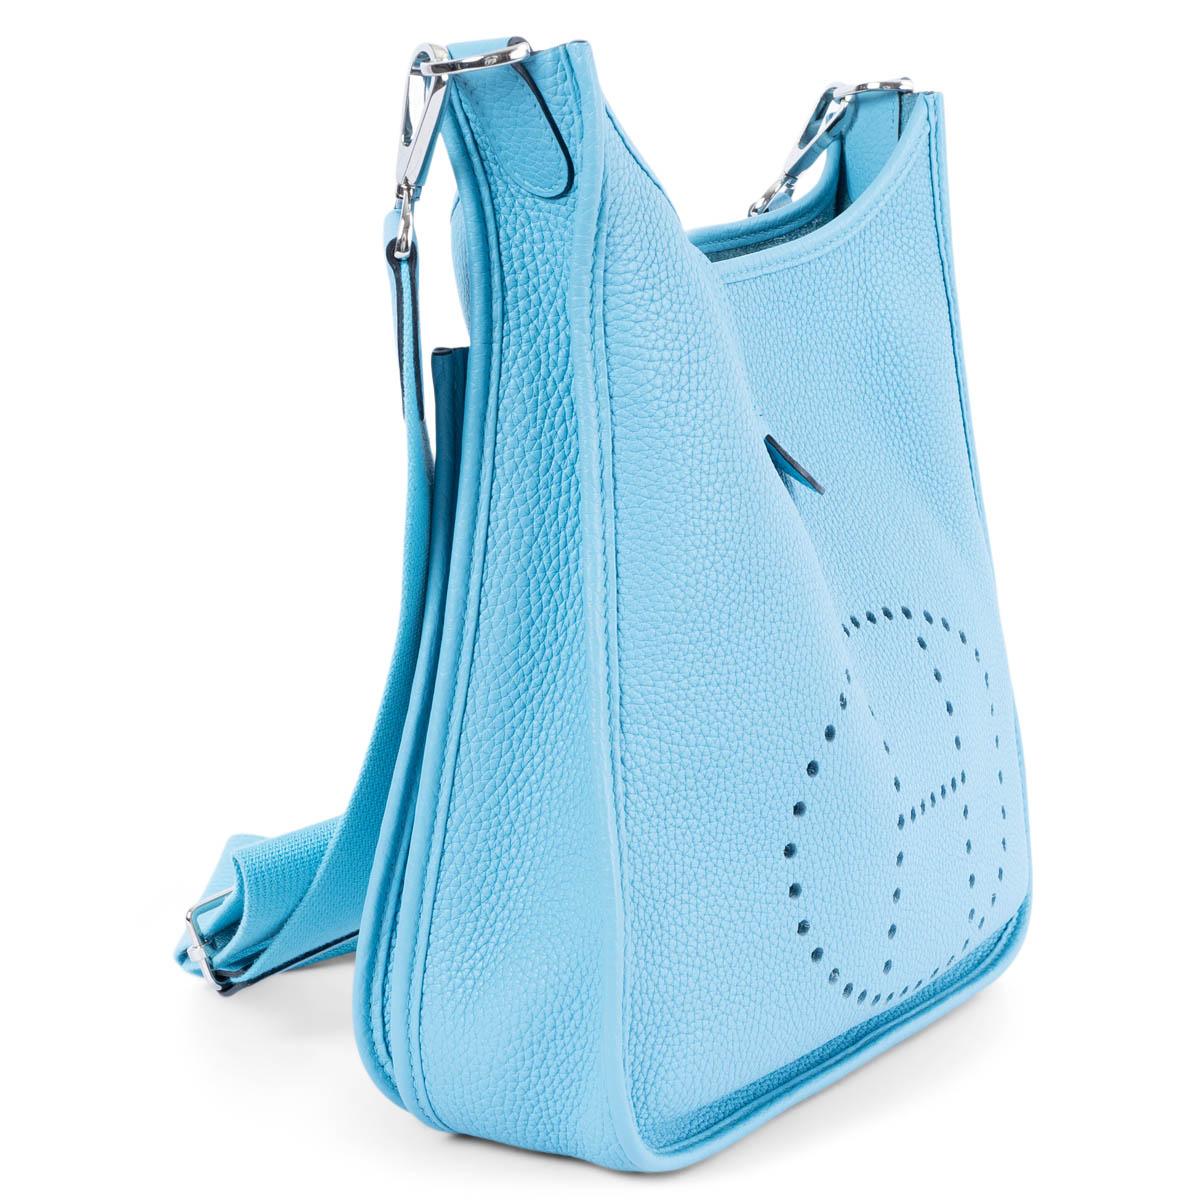 100% authentic Hermès Evelyne III 29 crossbody bag in Bleu du Nord (sky blue) Taurillon Clemence leather. Adjustable canvas shoulder strap. Open pocket on the back. Closes with a snap button on top. Unlined. Has been carried and is in virtually new